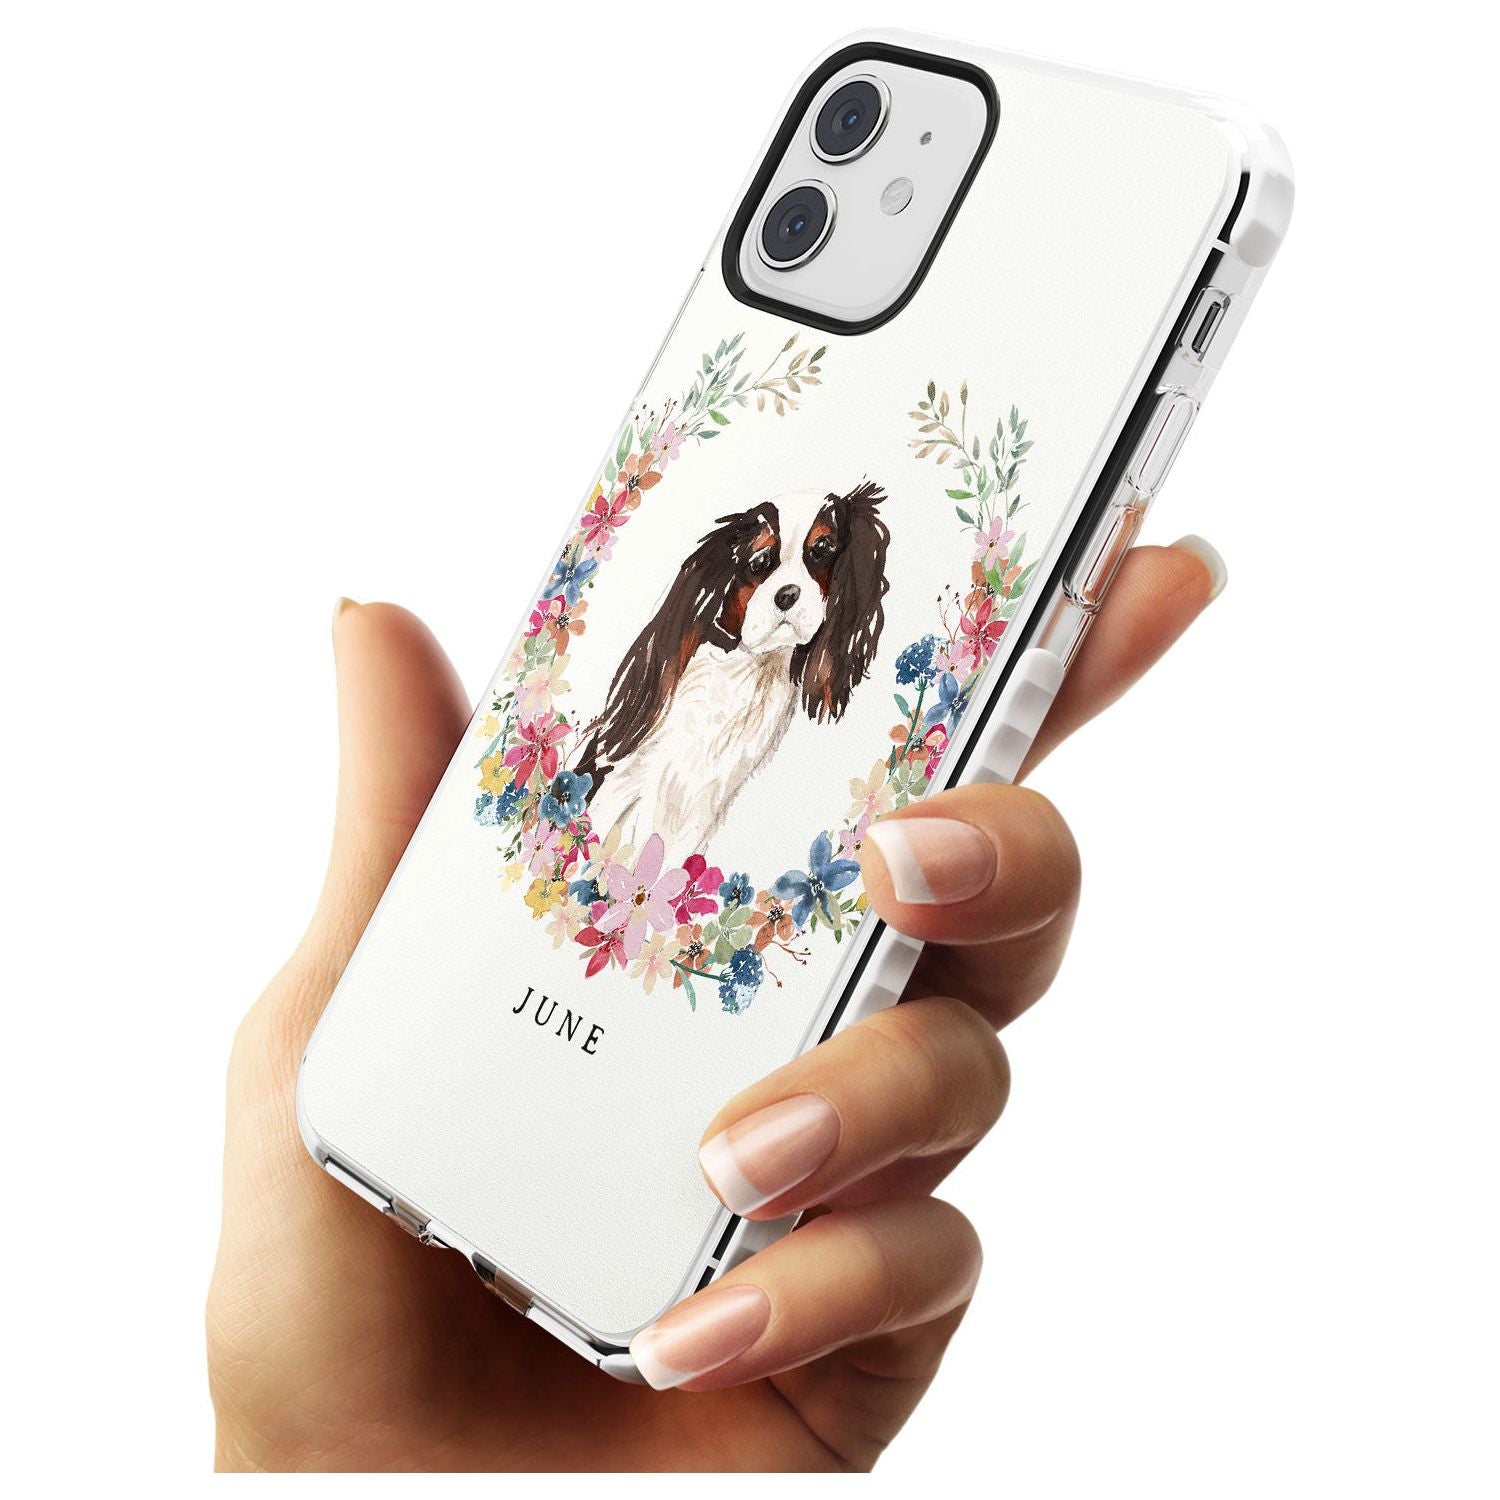 Tri Coloured King Charles Watercolour Dog Portrait Impact Phone Case for iPhone 11